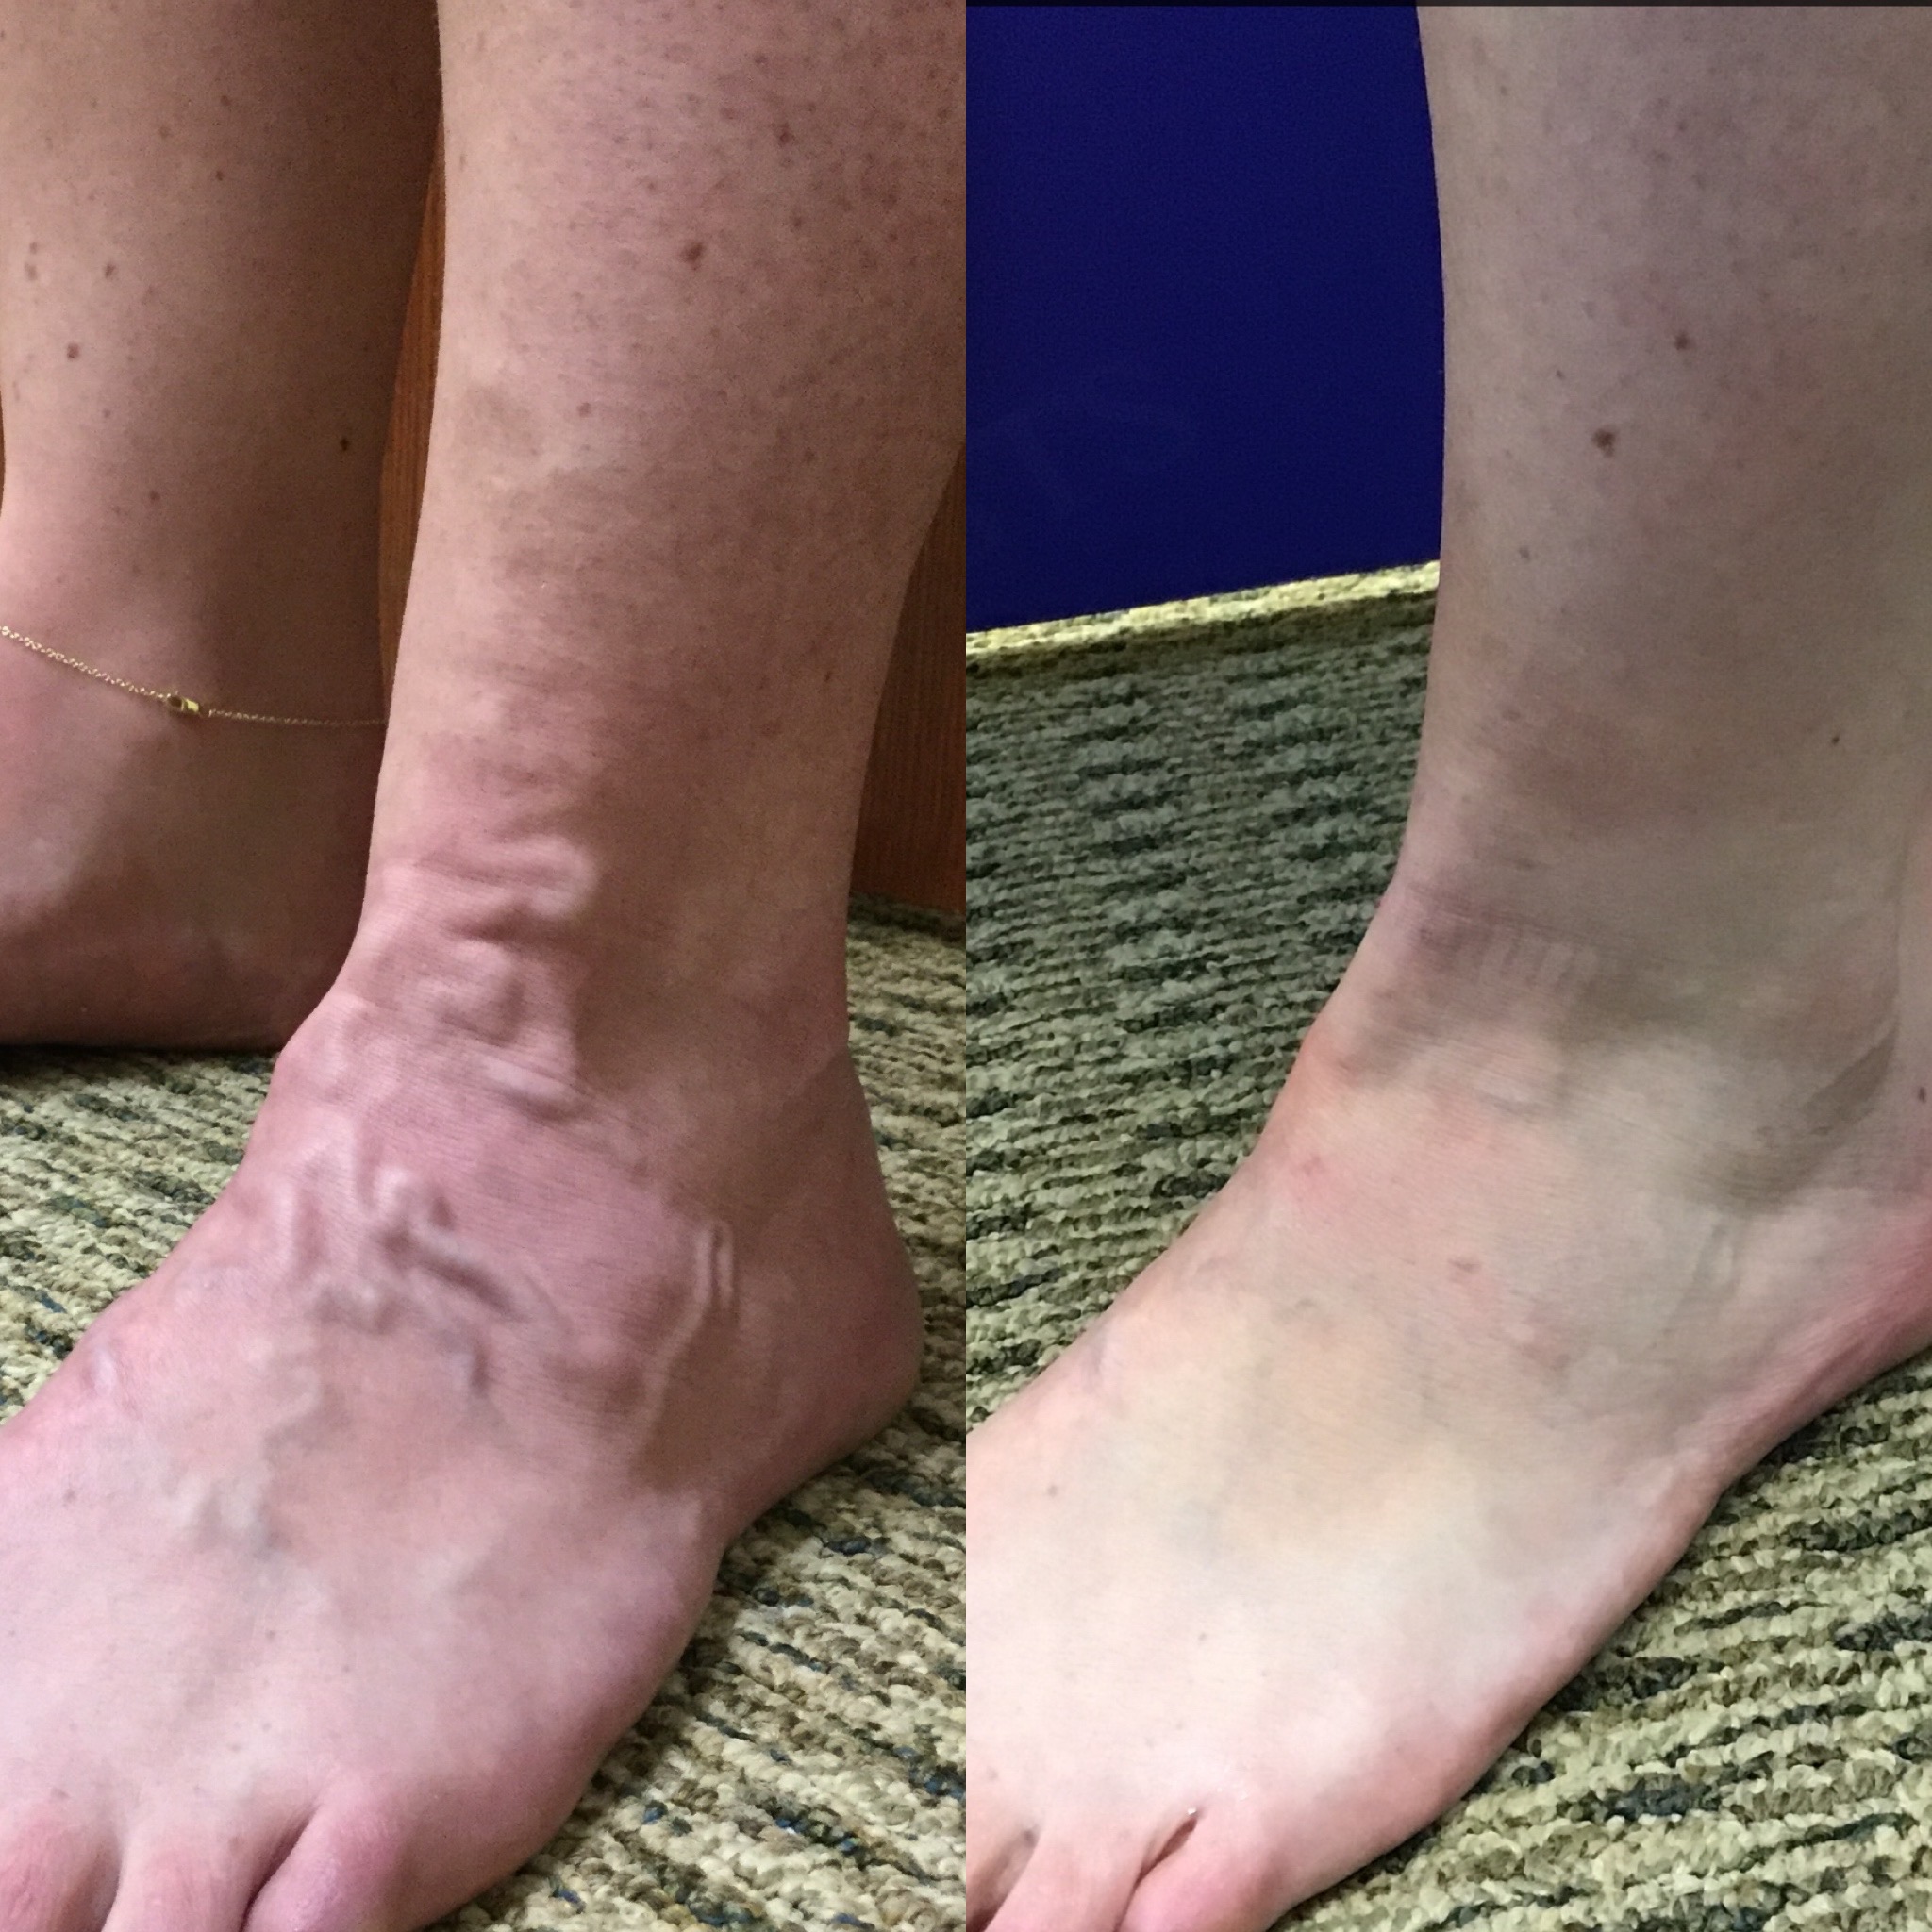 vein evaluation and what to expect